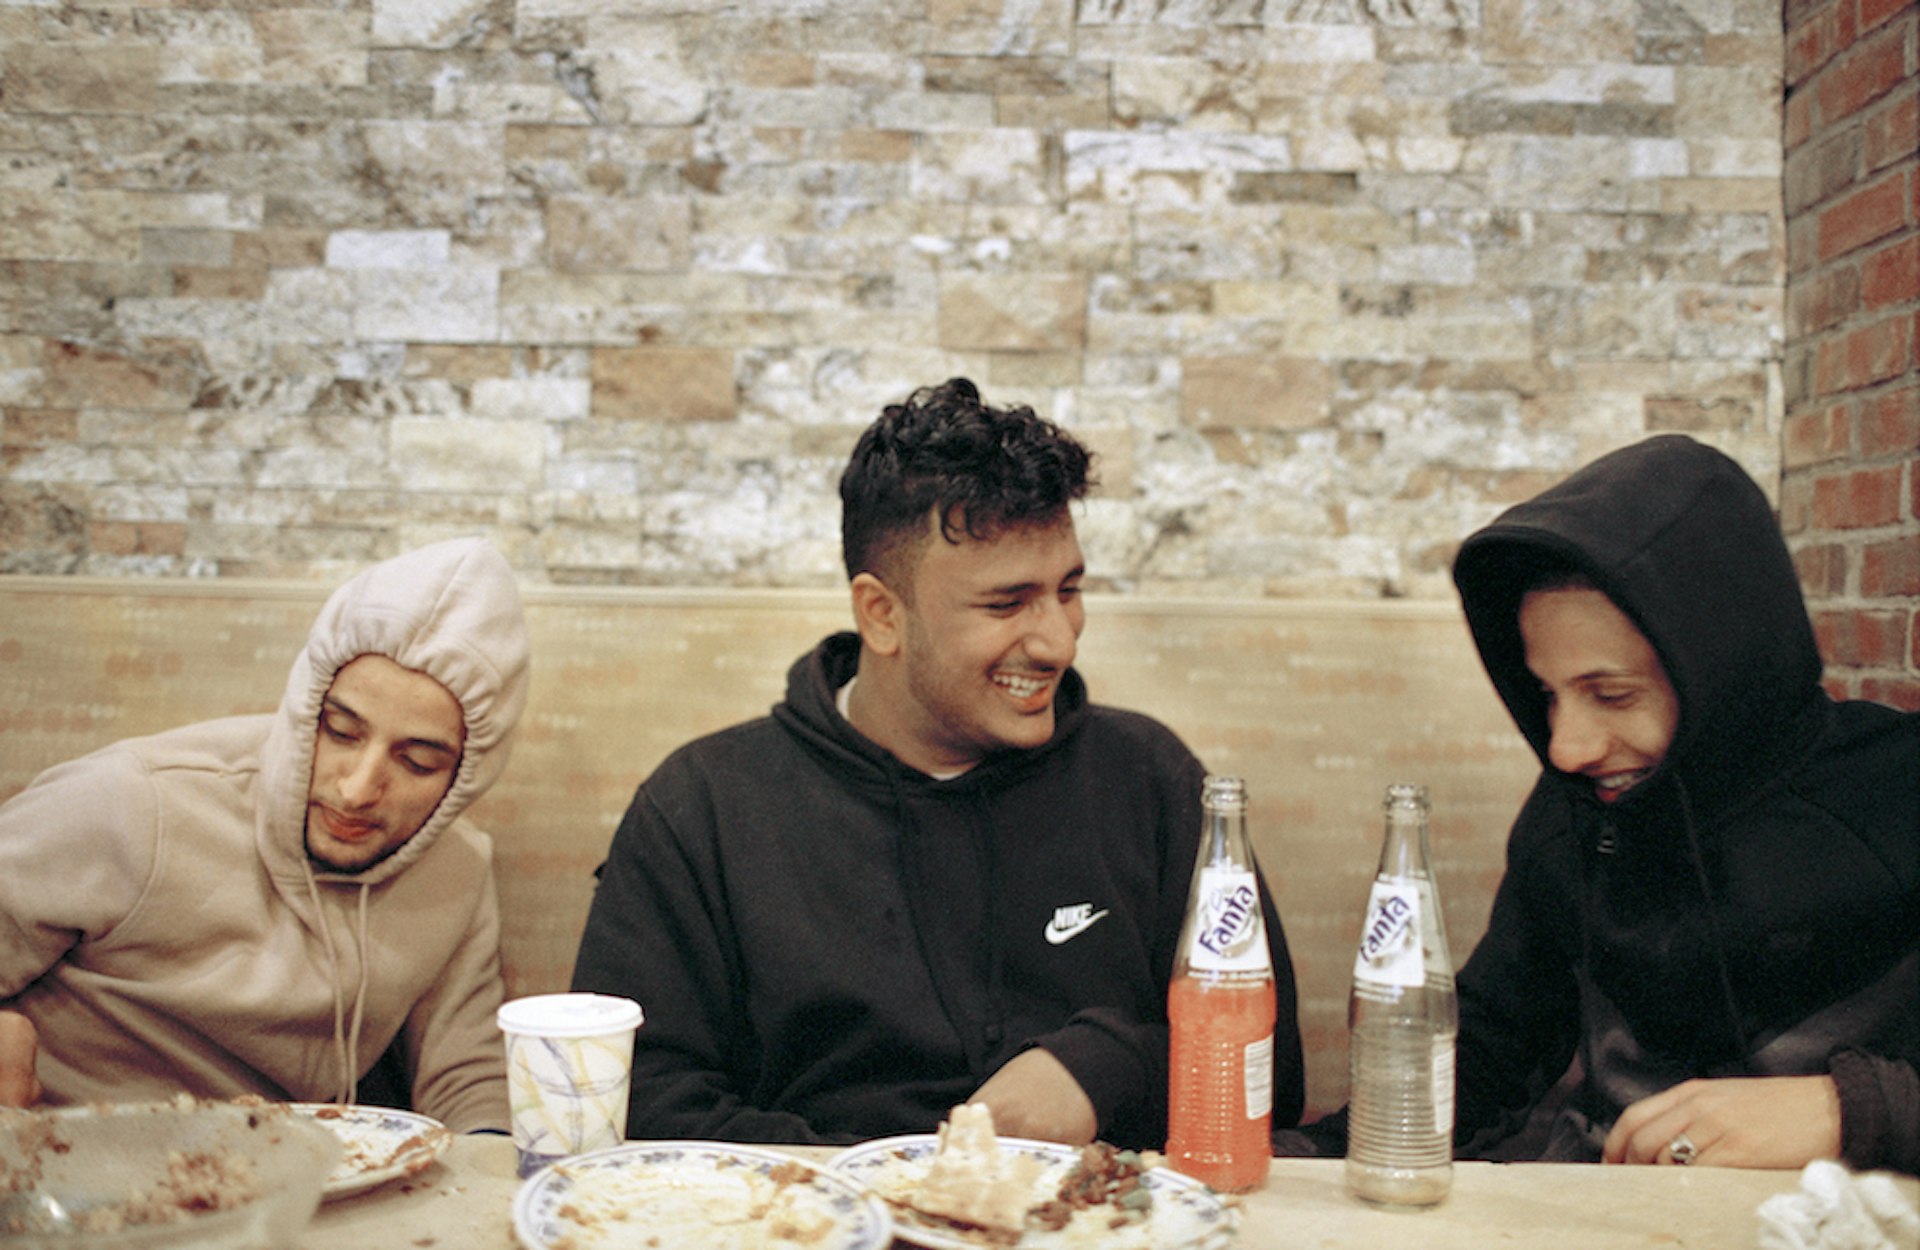 Othman Hussein, Sid Hatem and Ahmed Elsamet joke around during a late breakfast at a local Yemeni restaurant after an early morning soccer practice.